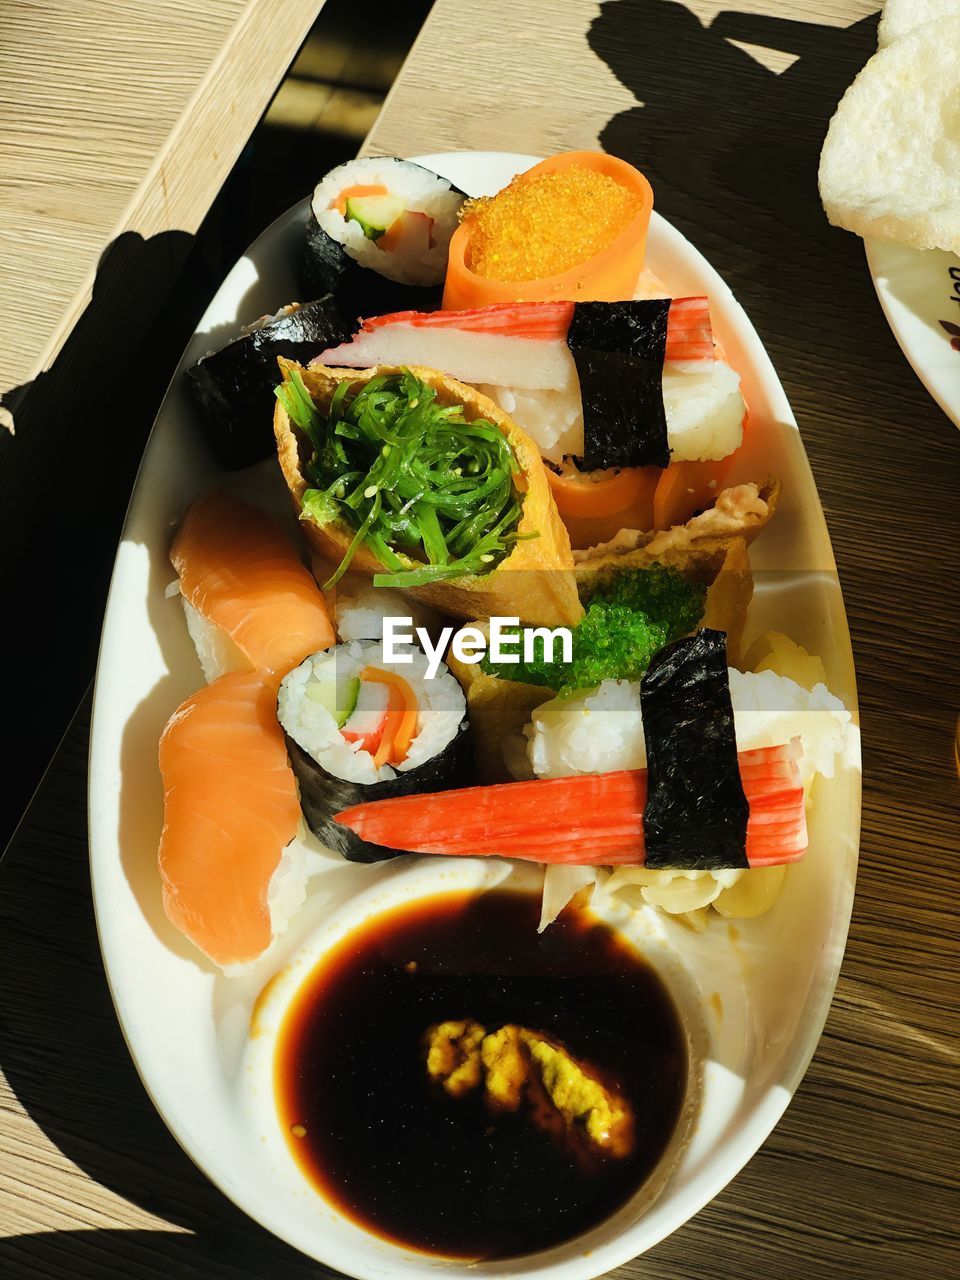 CLOSE-UP OF SUSHI SERVED ON TABLE